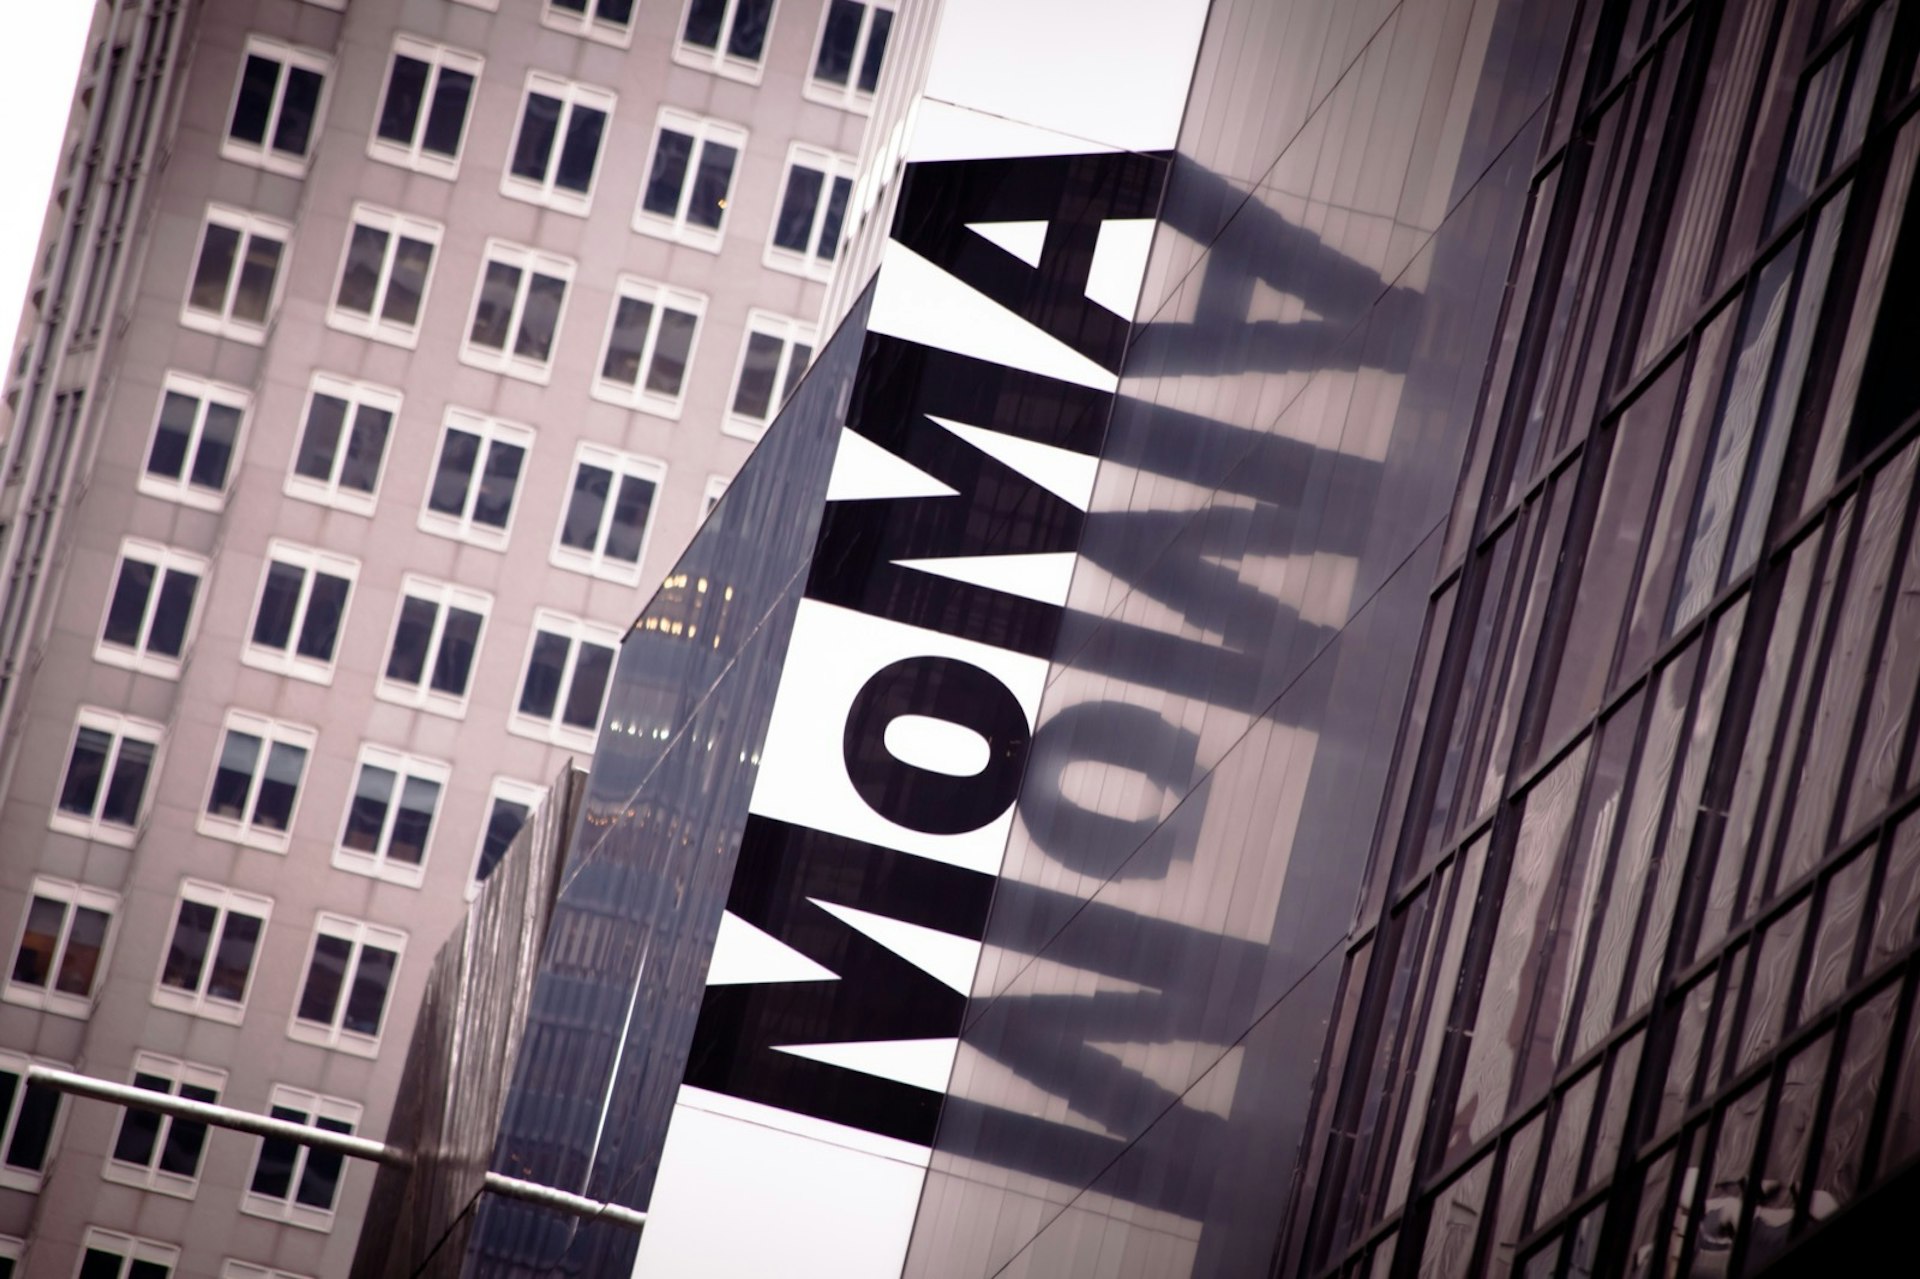 The Letters MOMA are reflected in the windows of a museum in New York City